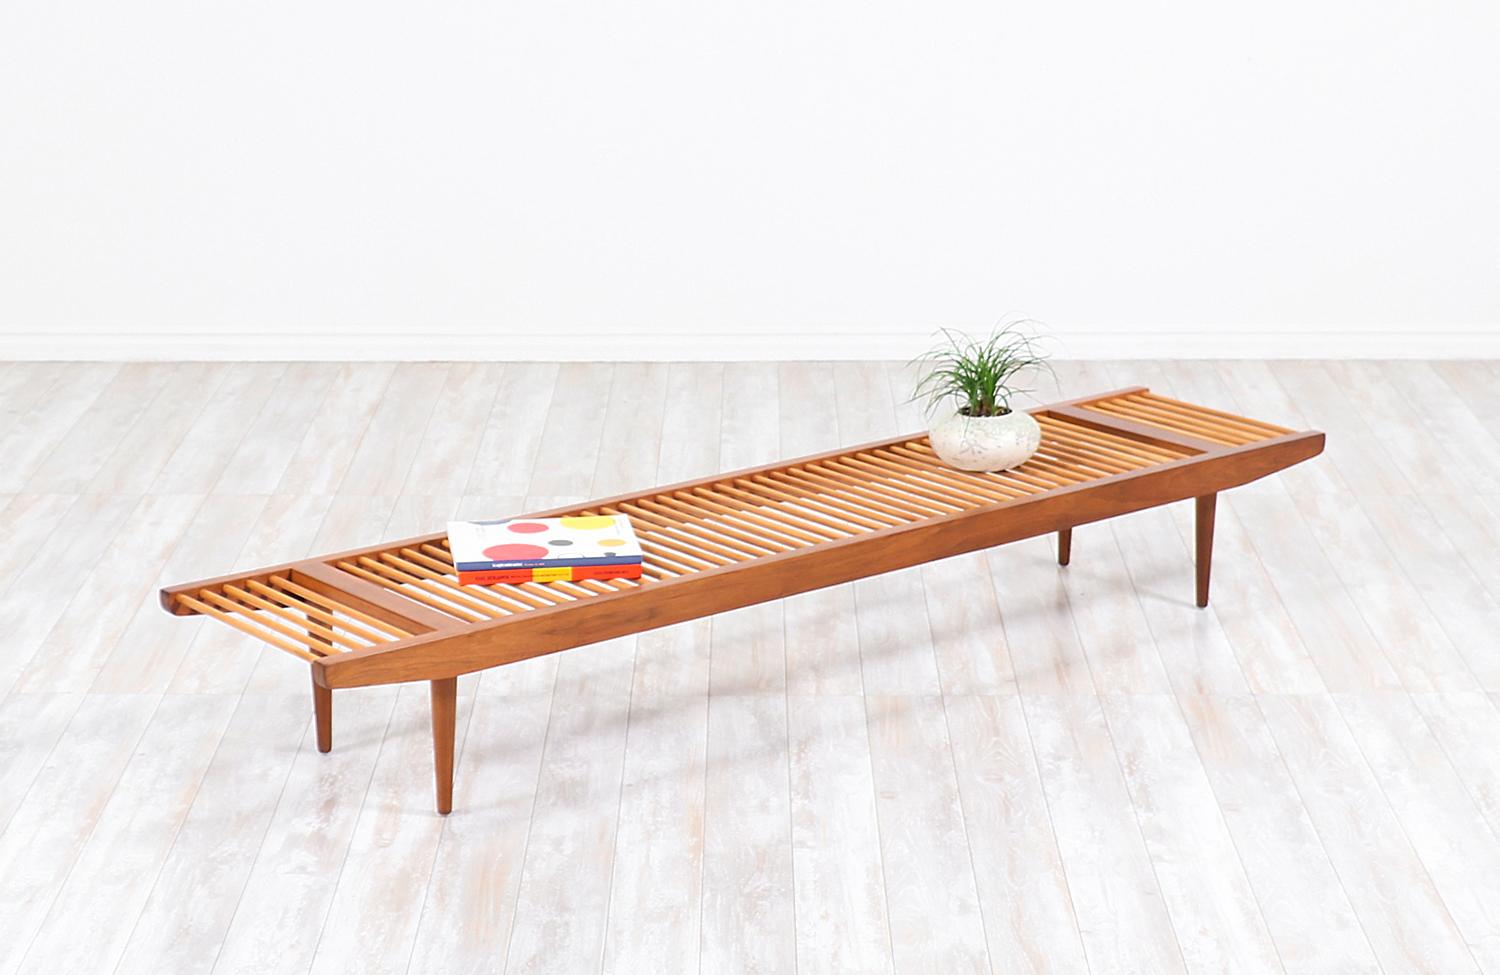 Elegant Californian modern bench designed by Milo Baughman for Glenn of California in the United States, circa 1950s. This beautiful large dowel bench features a solid low profile frame and is comprised of a lovely contrast of walnut wood and